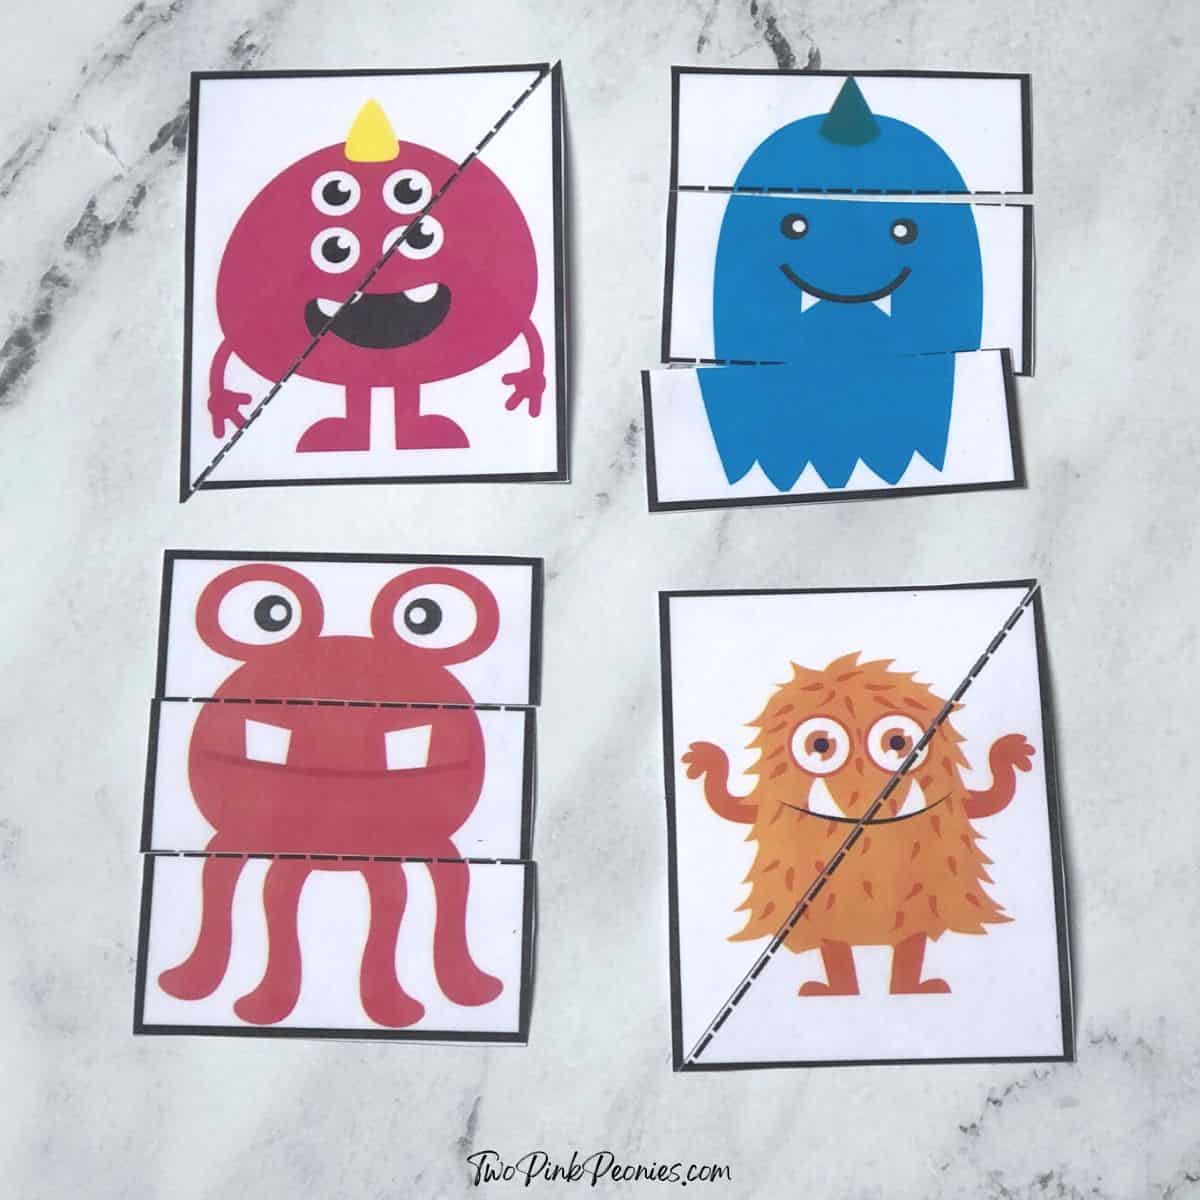 Four busy bag monster puzzles.